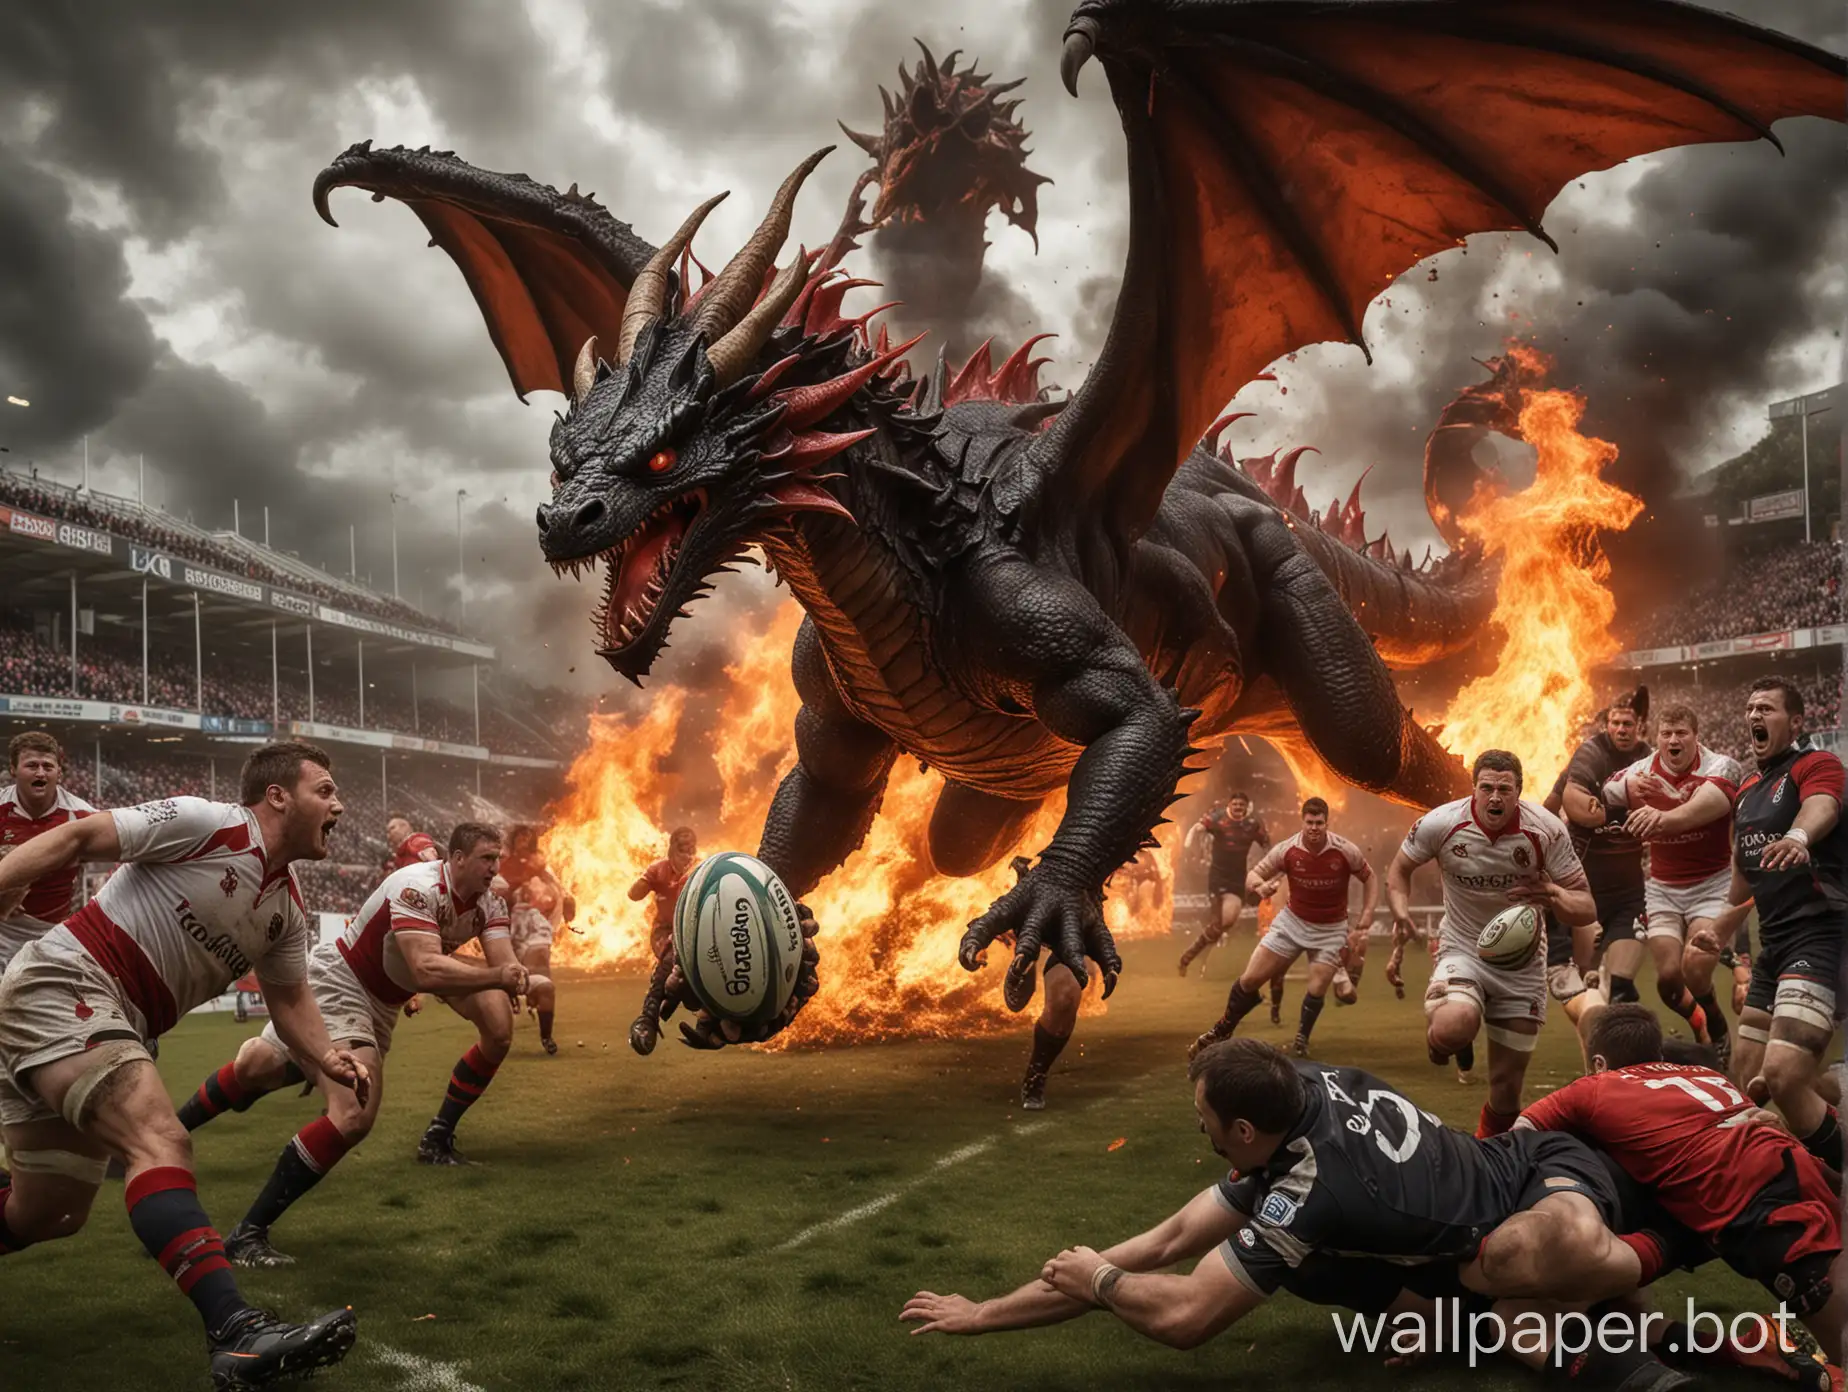 rugby with dragons spitting fire